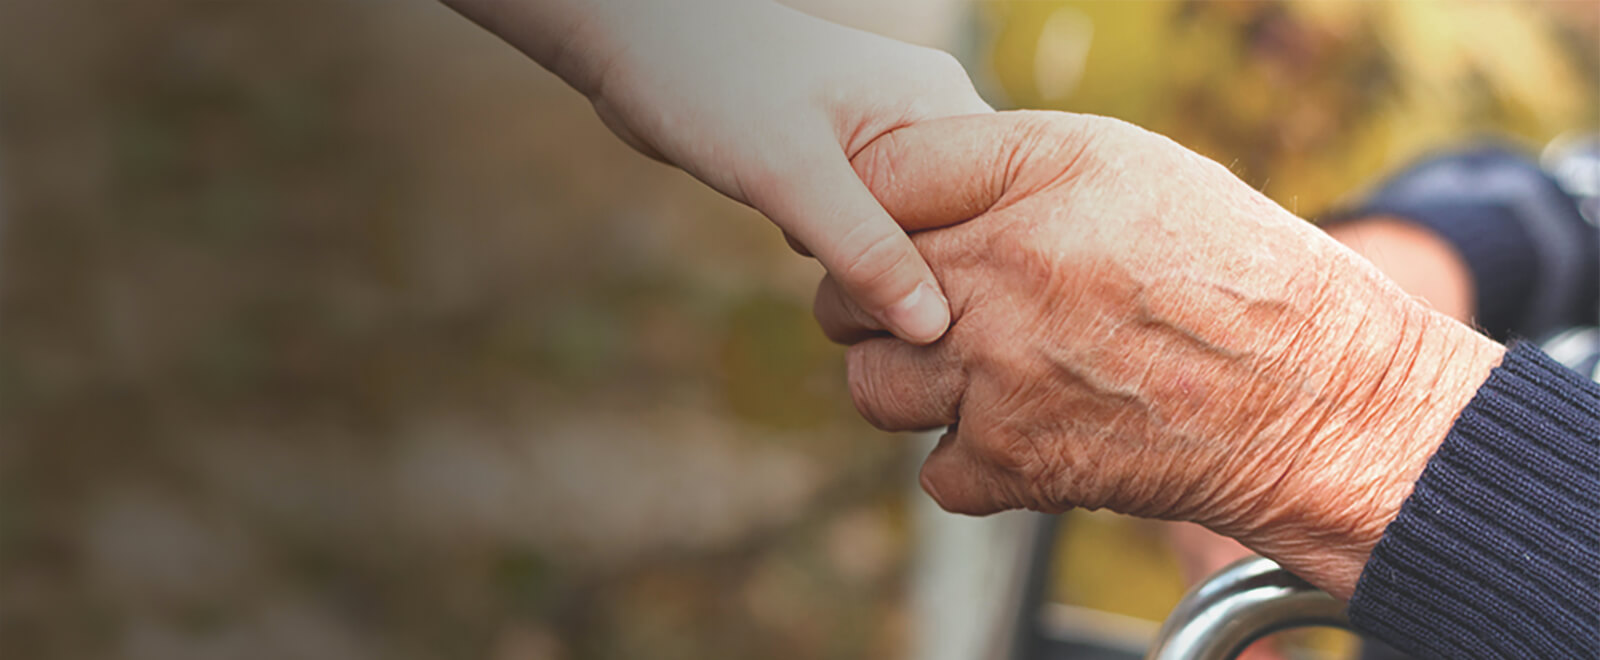 Young person hand reaching down to hold the hand of an elderly person